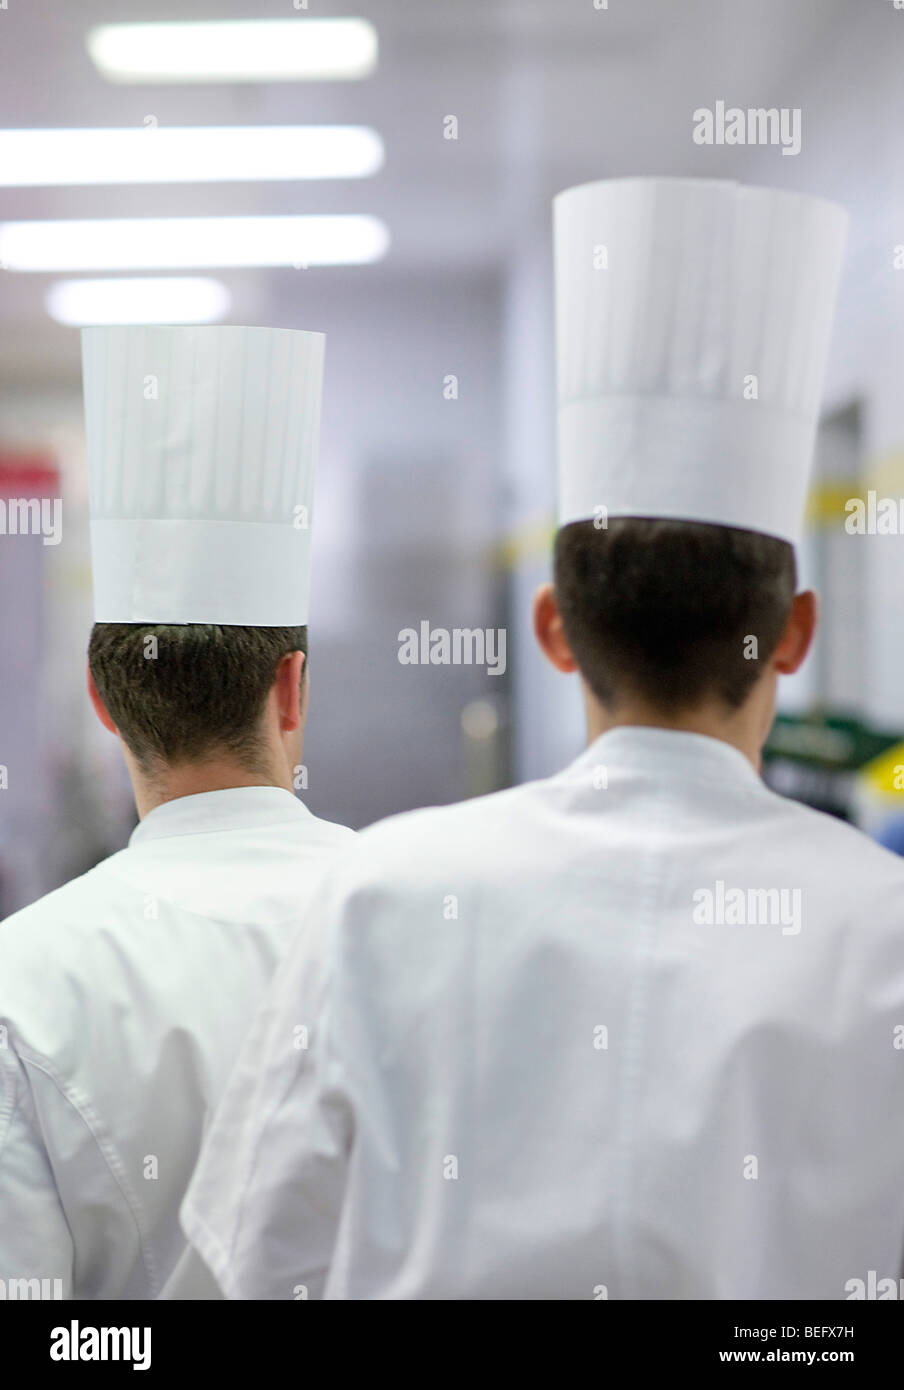 hef in the kitchen of Hotel ADLON Stock Photo